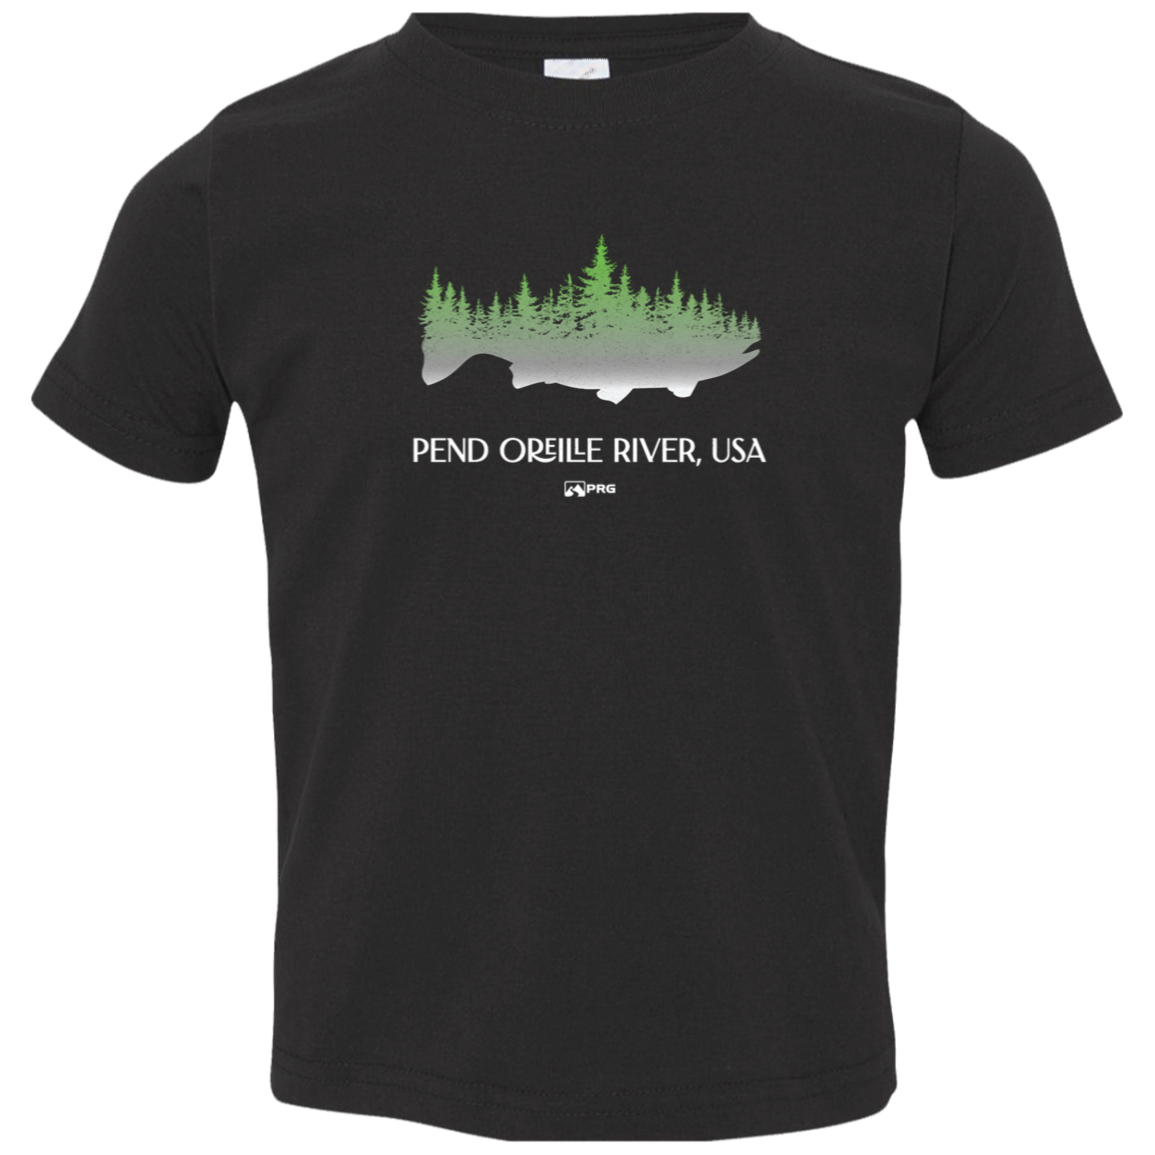 Forests & Fish - Toddler Shirt